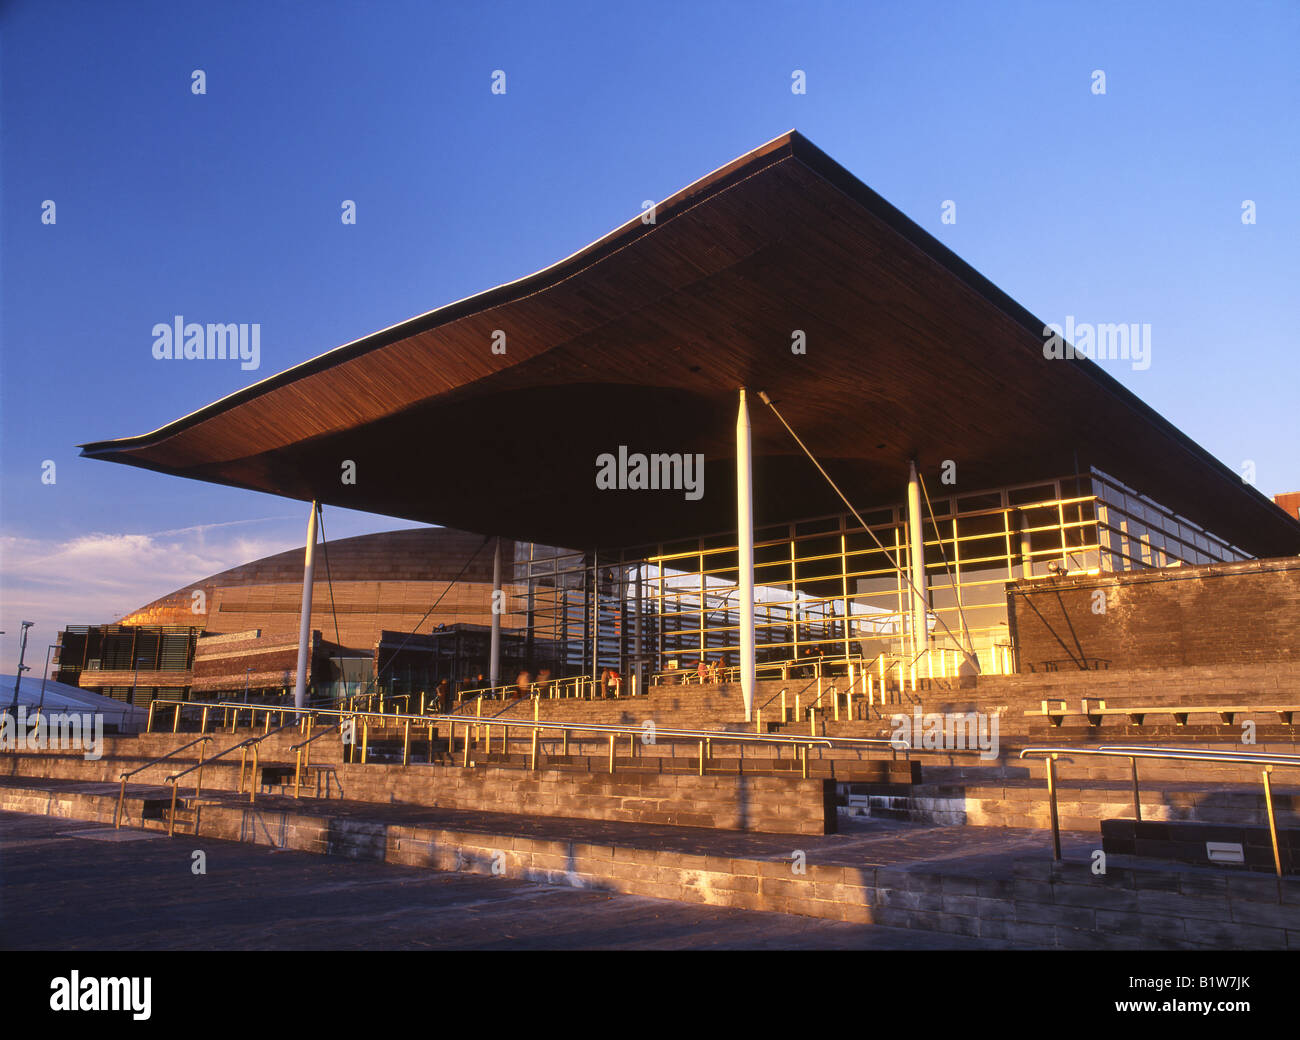 Senedd National Assembly for Wales building at sunset Cardiff Bay Cardiff Wales UK Stock Photo